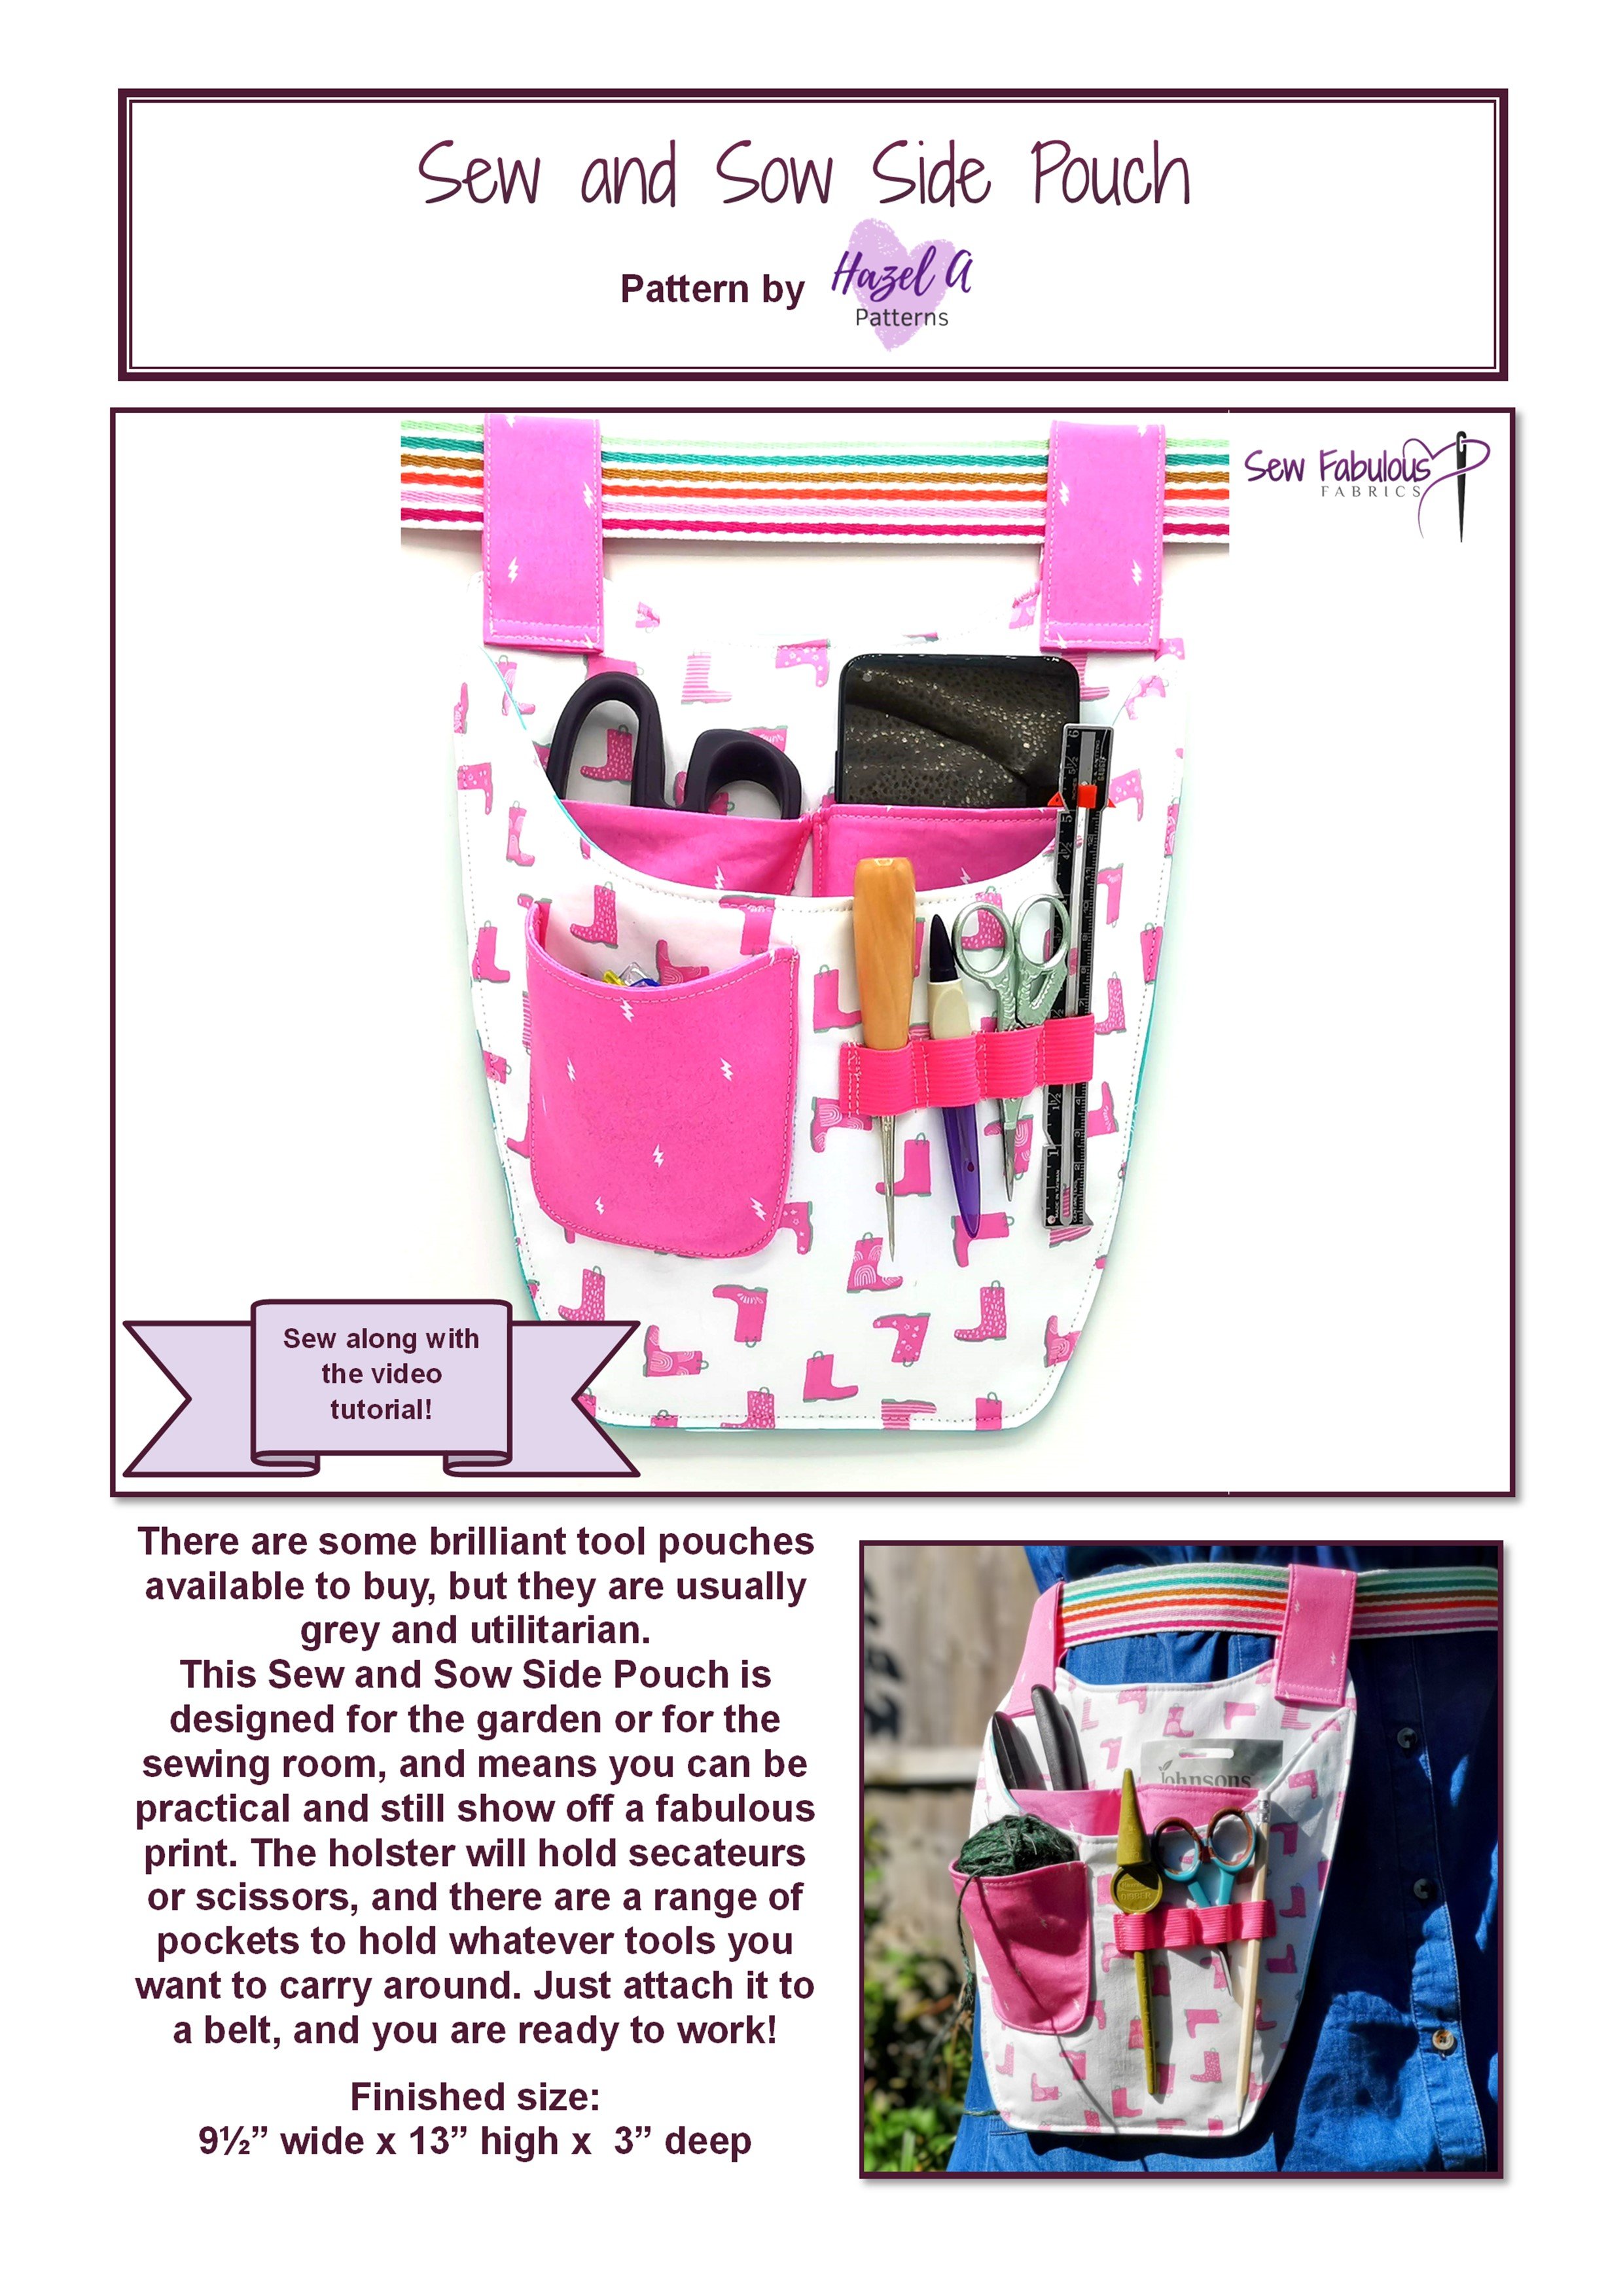 Sew and Sow Side Pouch Front Page.jpg